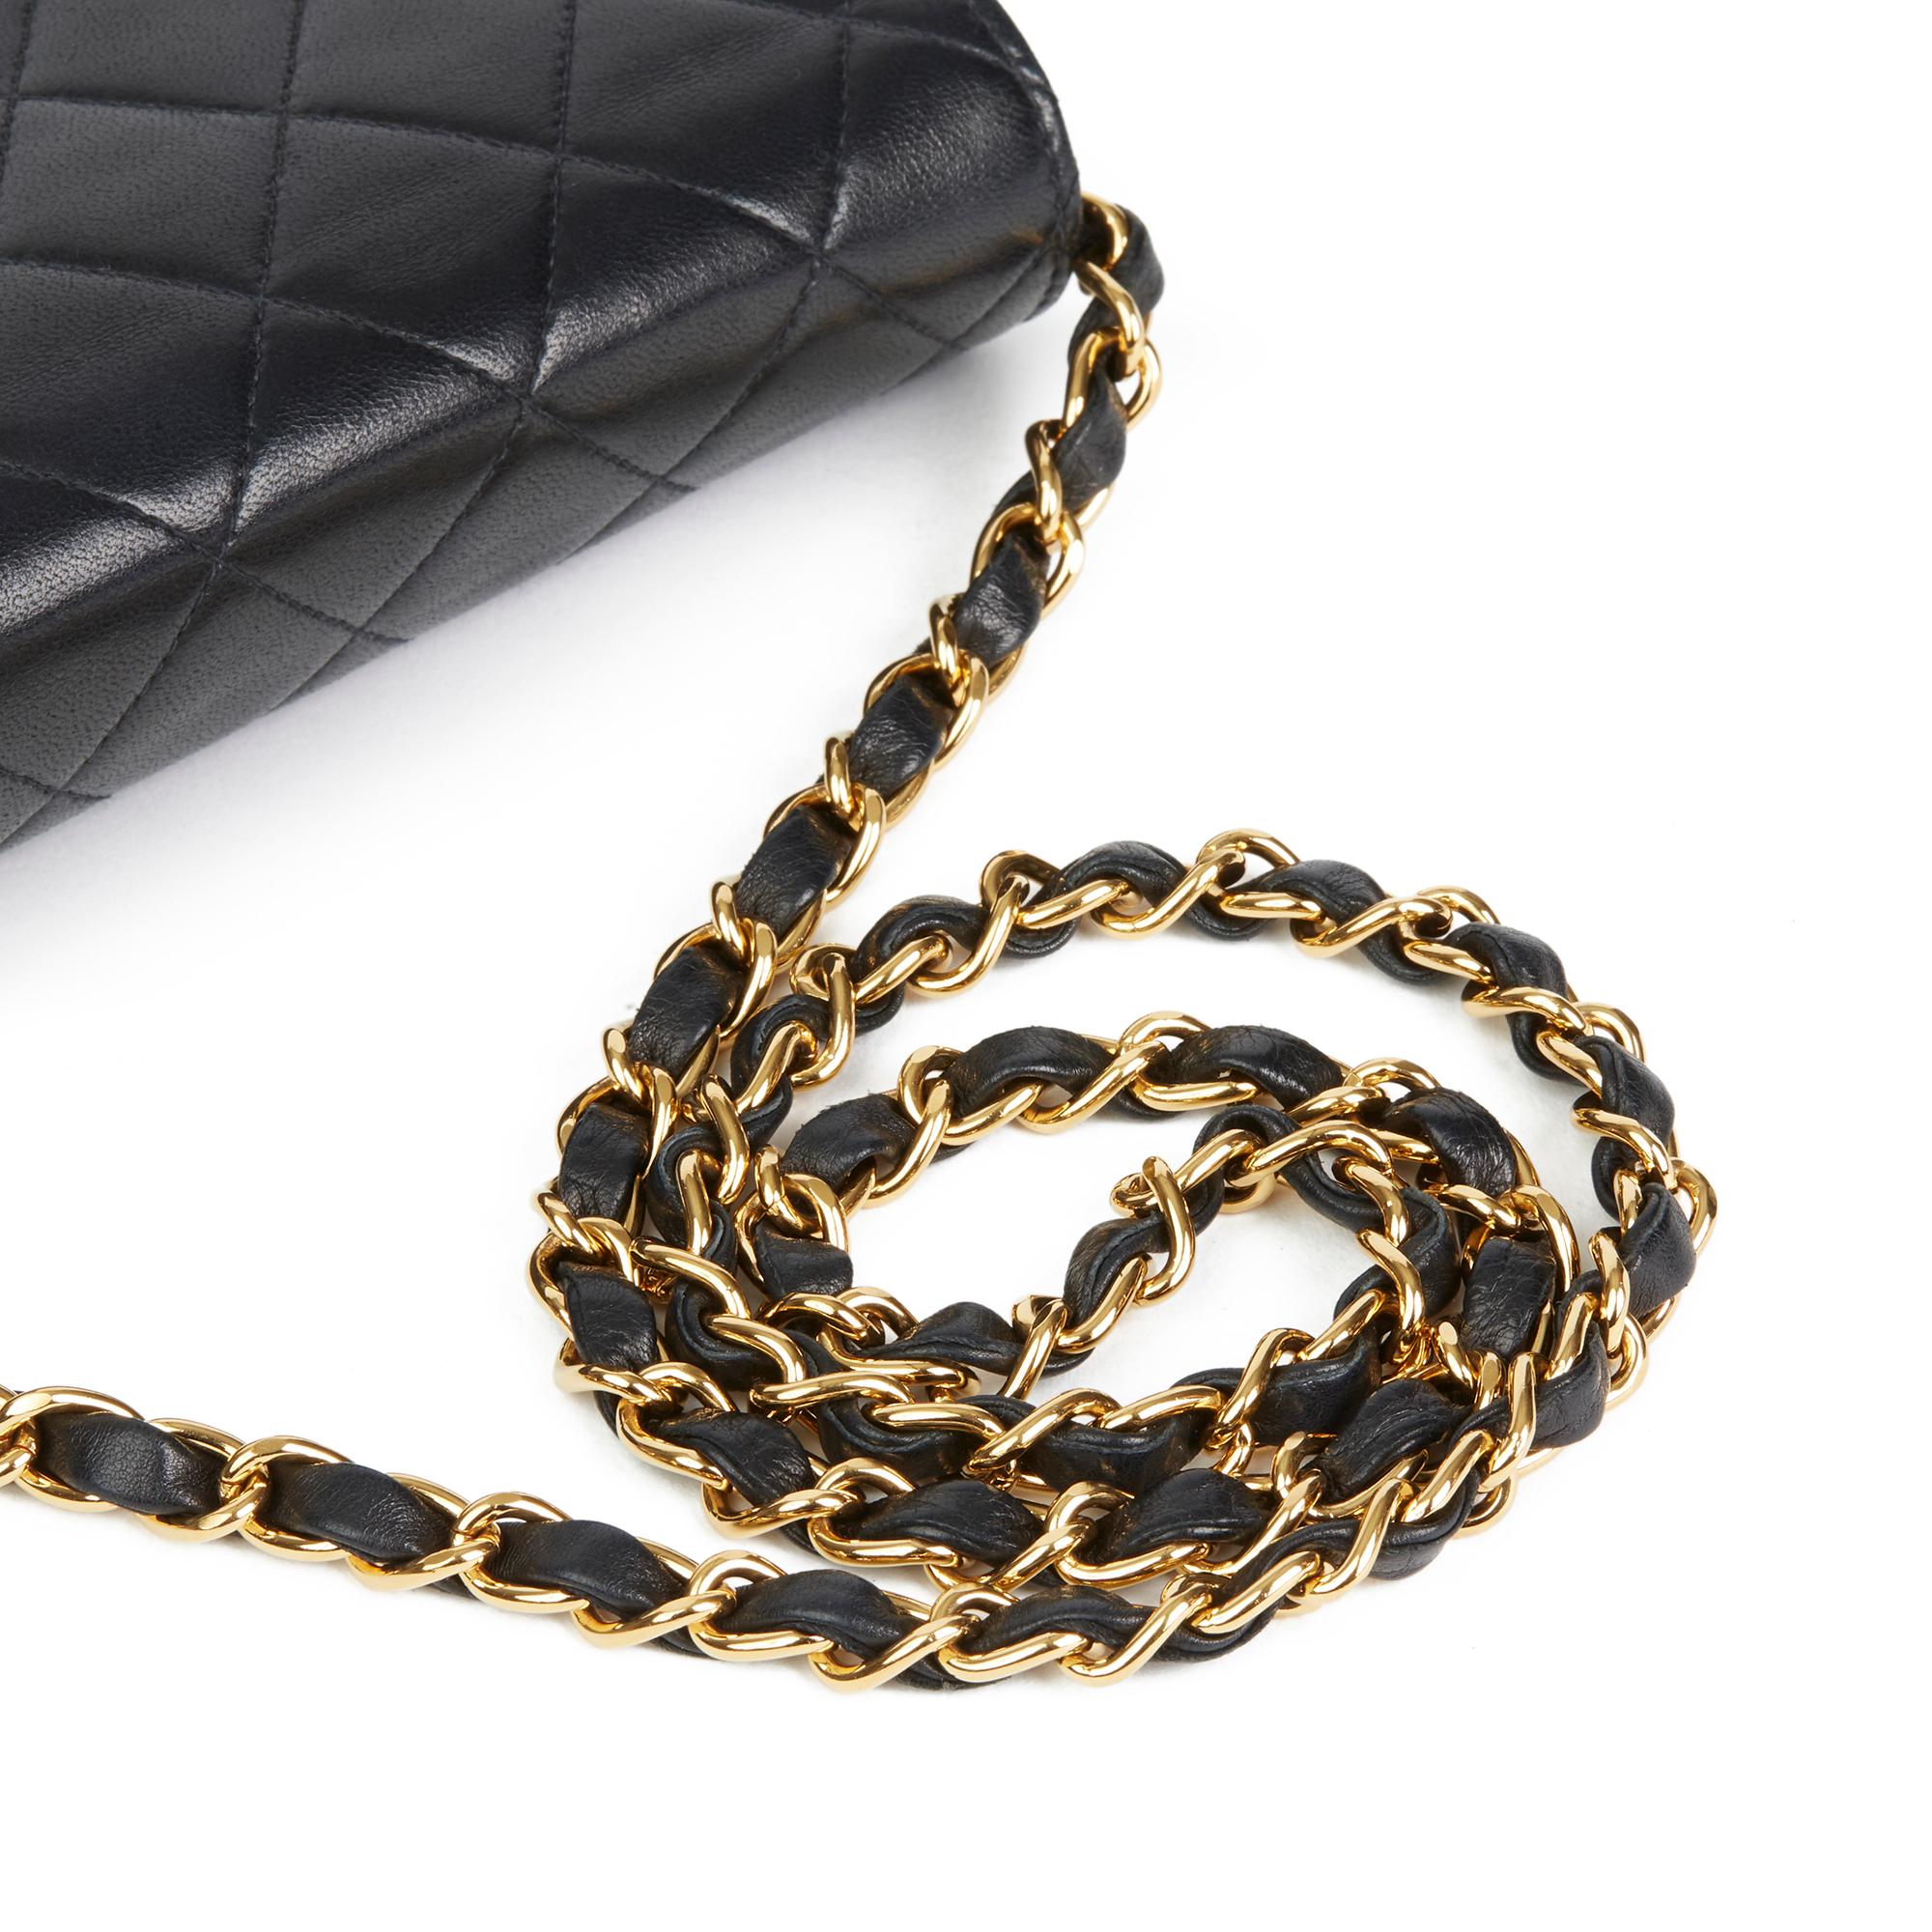 2001 Chanel Black Quilted Lambskin Mini Flap Bag  4